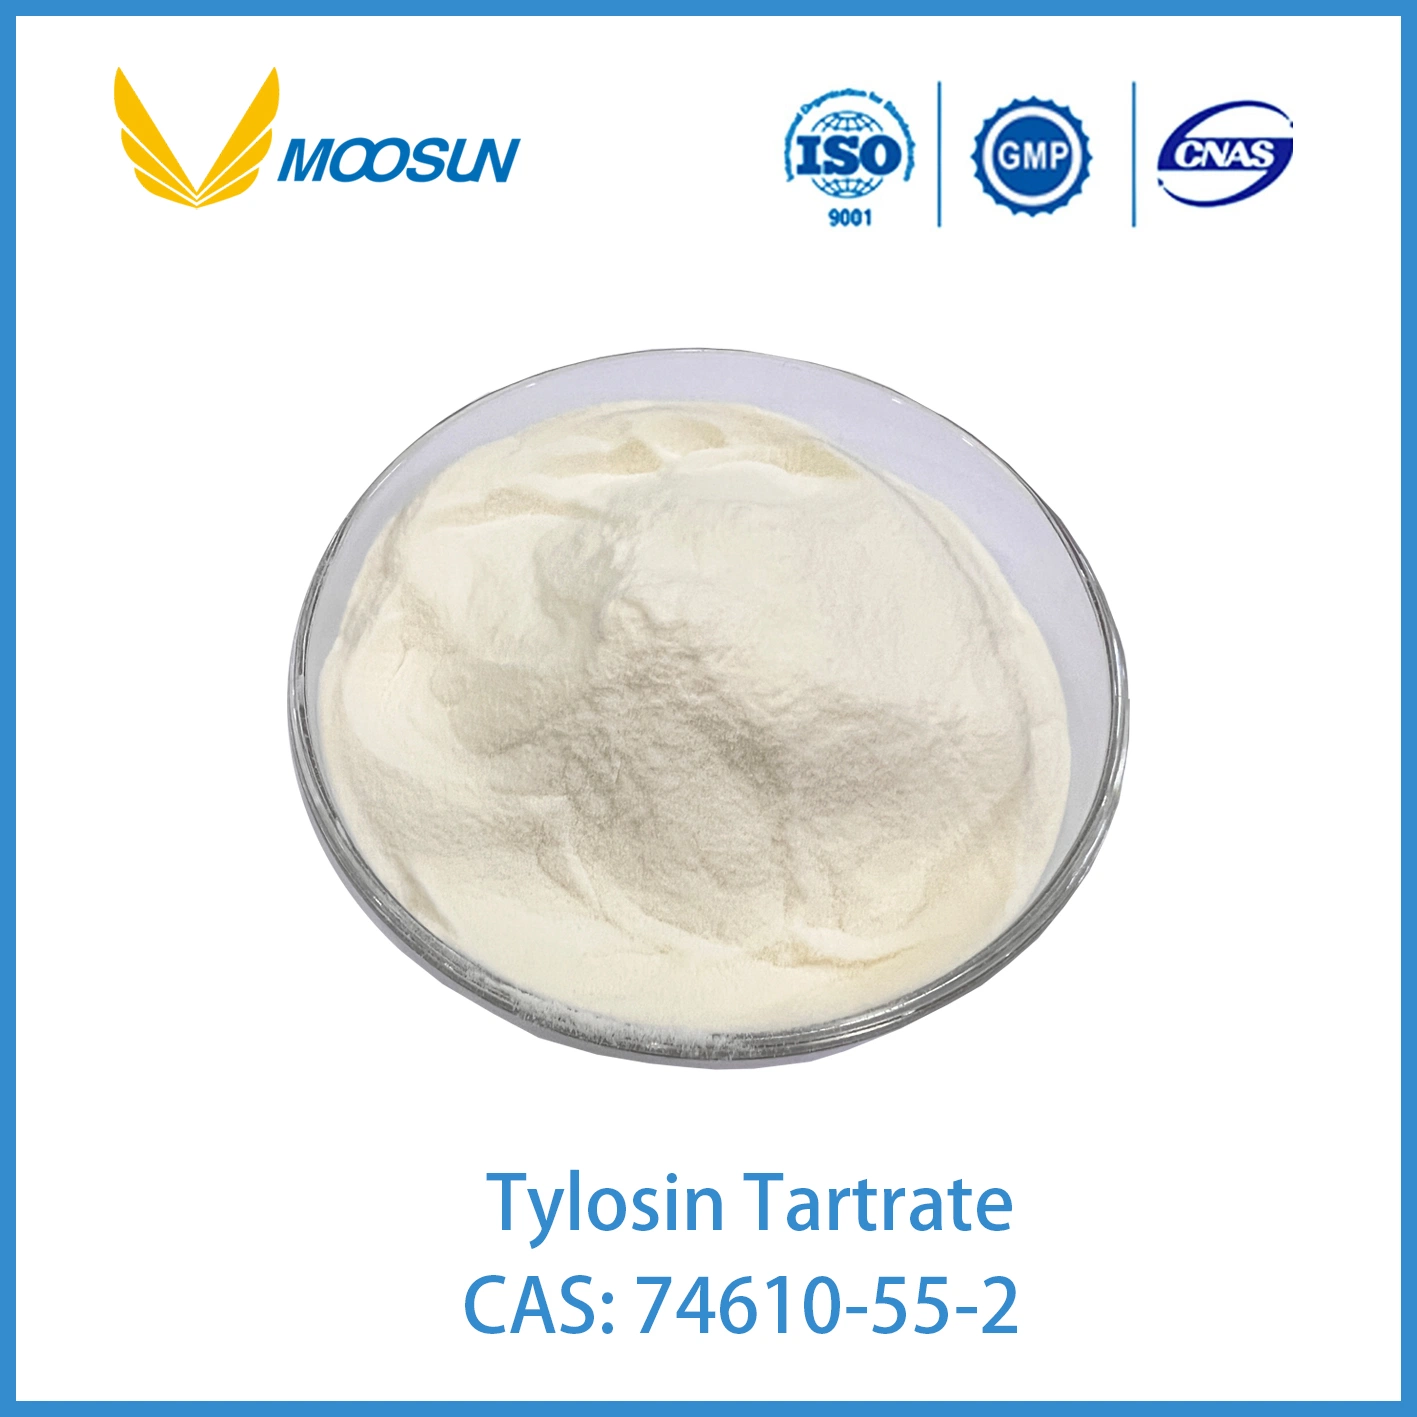 Superb Veterinary Tylosin Tartrate CAS 74610-55-2 with GMP ISO Standard